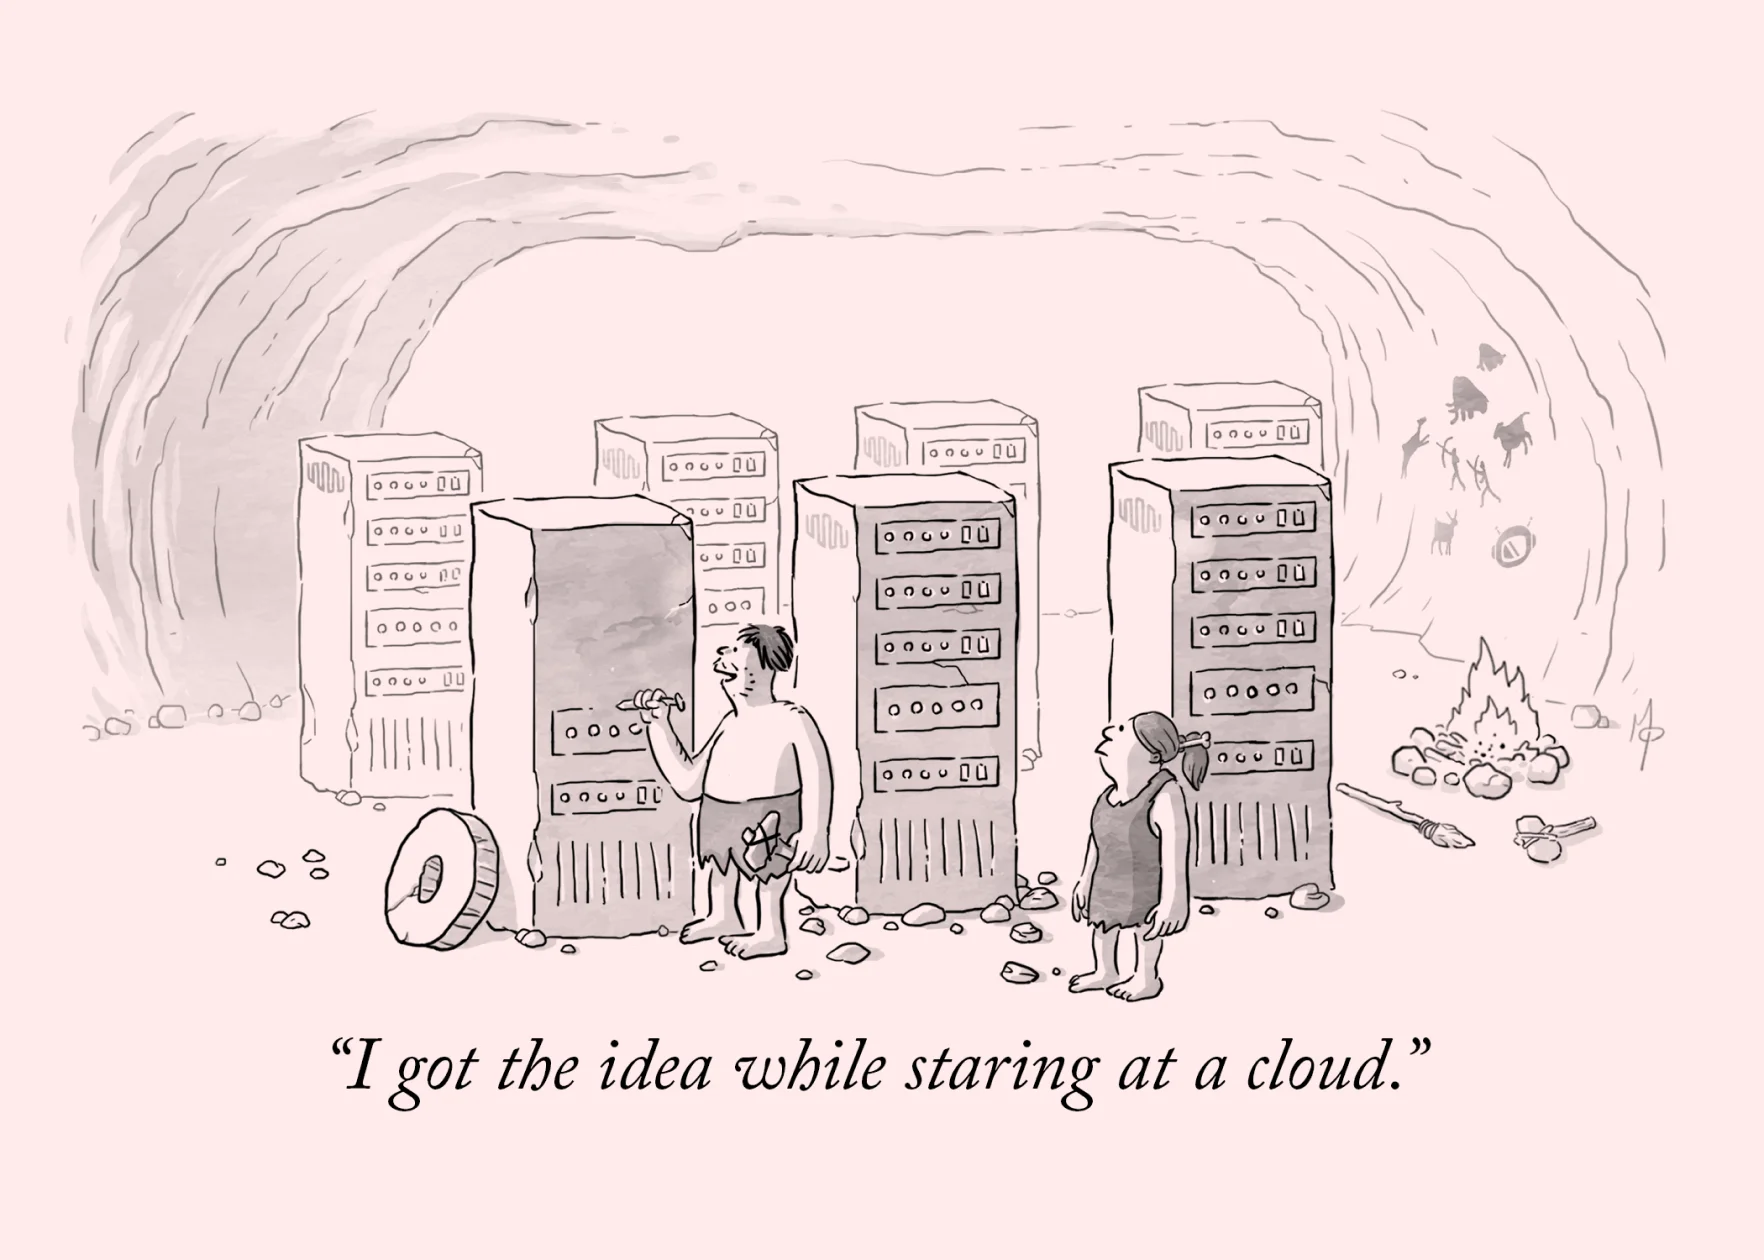 A cartoon-style illustration of a caveman and woman inside a cave. The man is carving a server rack out of stone. The caption reads: I got the idea while starting at a cloud.